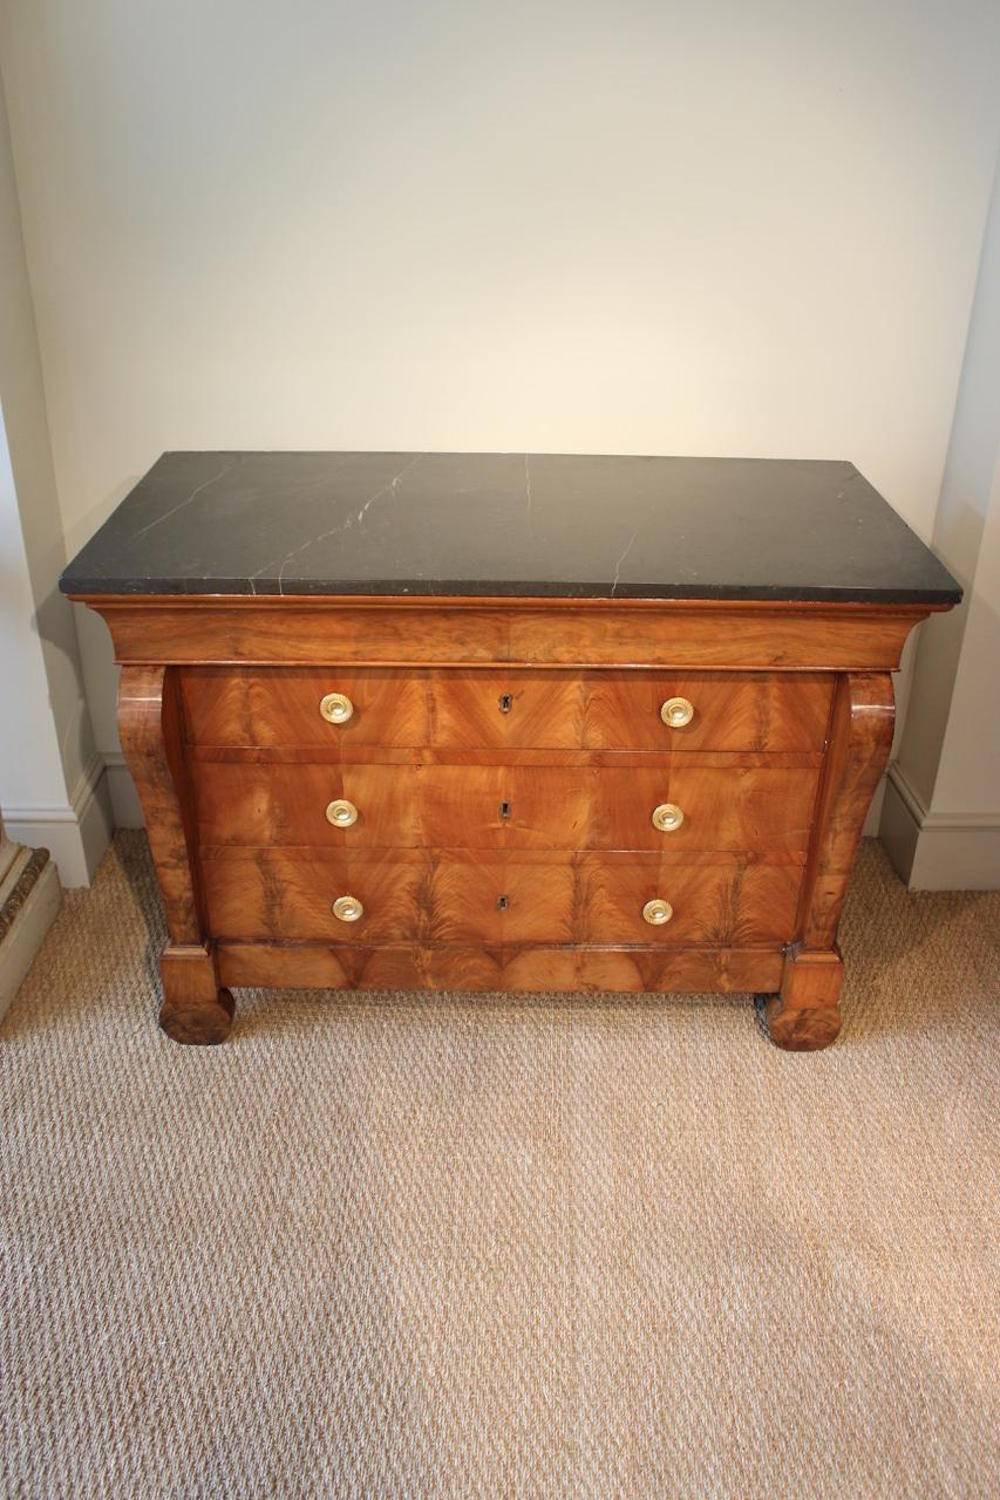 A large and well-proportioned, figured walnut commode with a marble top above a blind frieze drawer and three further drawers with book-matched veneers, French Restoration period, circa 1840.